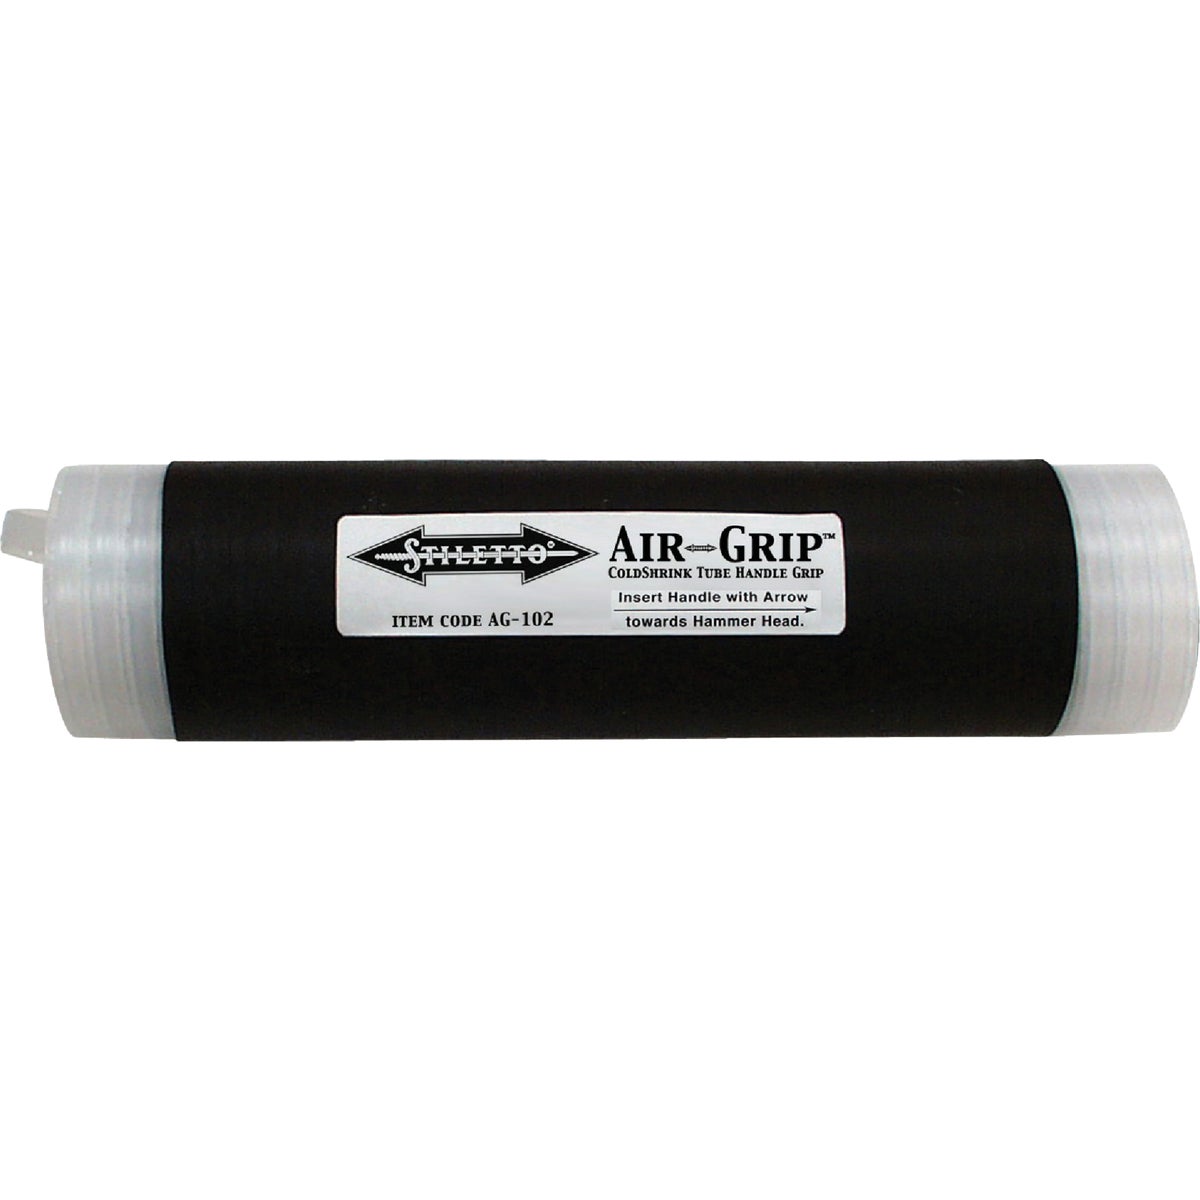 Item 344942, AirGrip 2" x 8" pre-expanded rubber wrap tube shrinks to fit any handle 